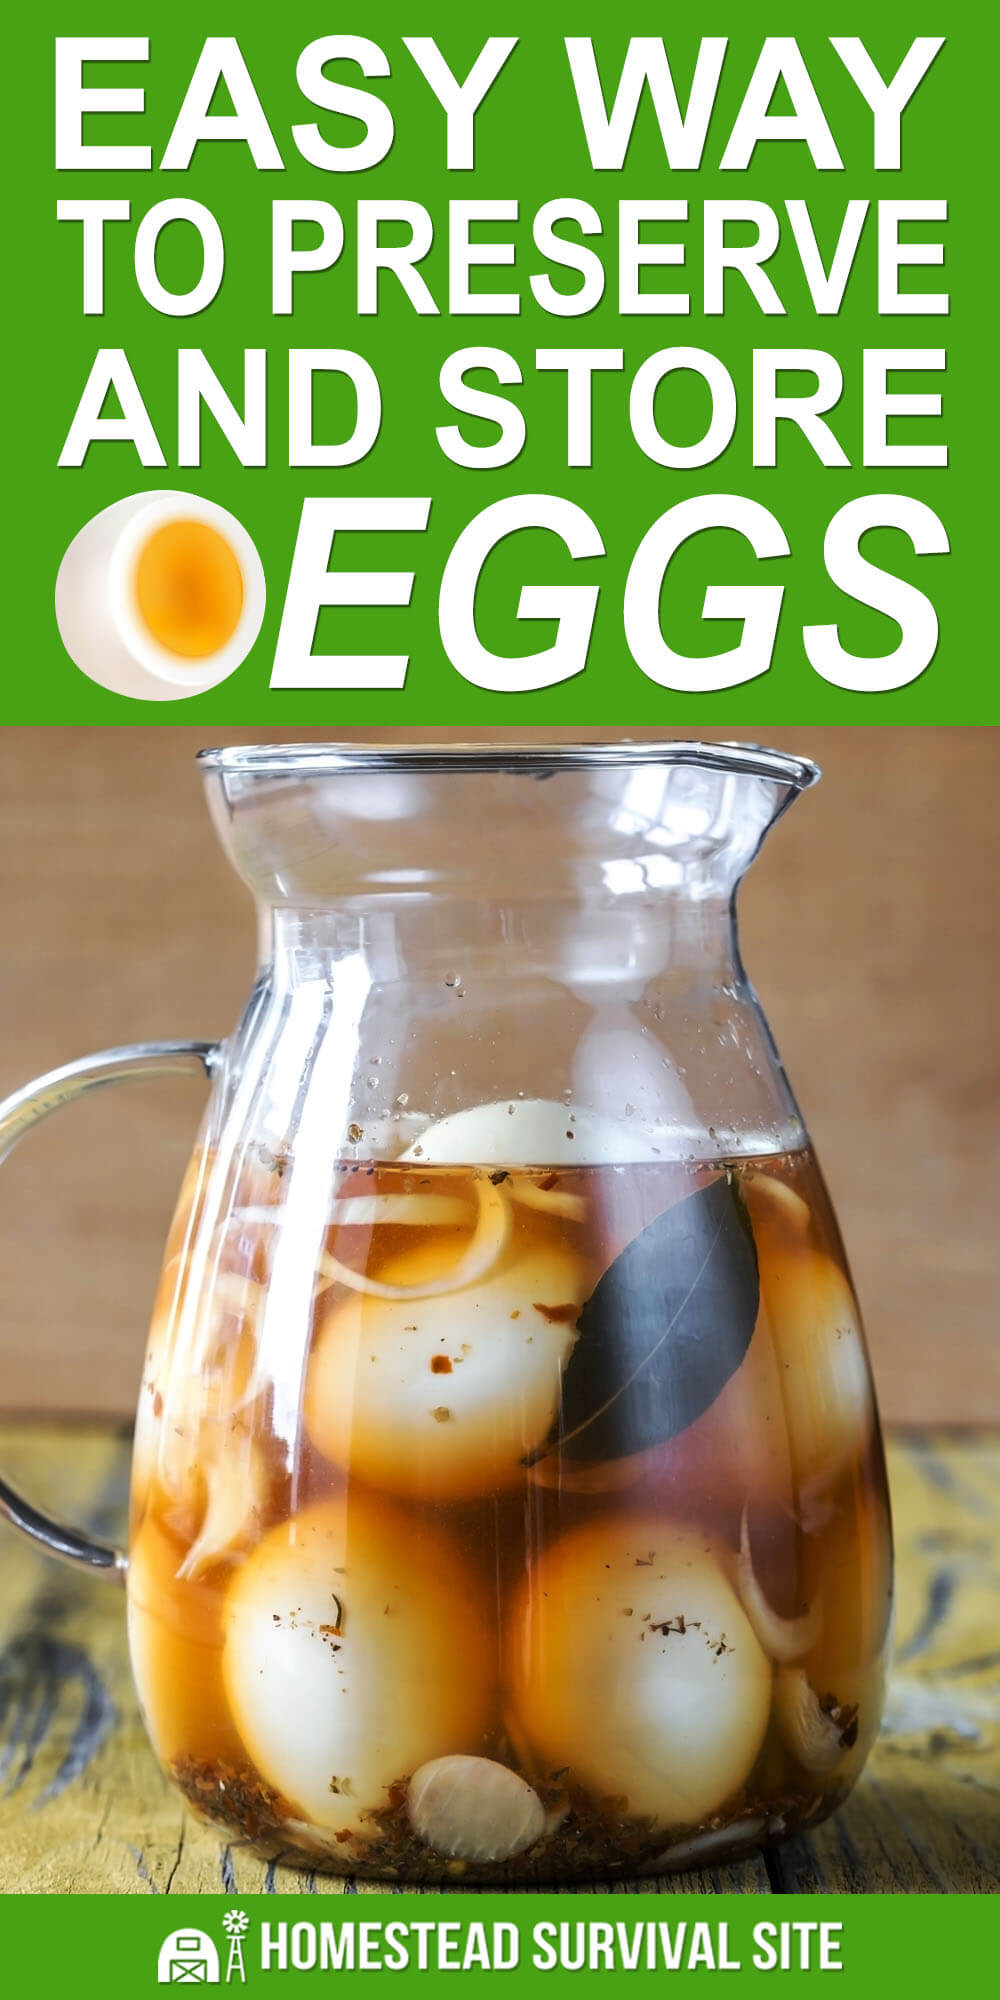 Easy Way To Preserve and Store Eggs